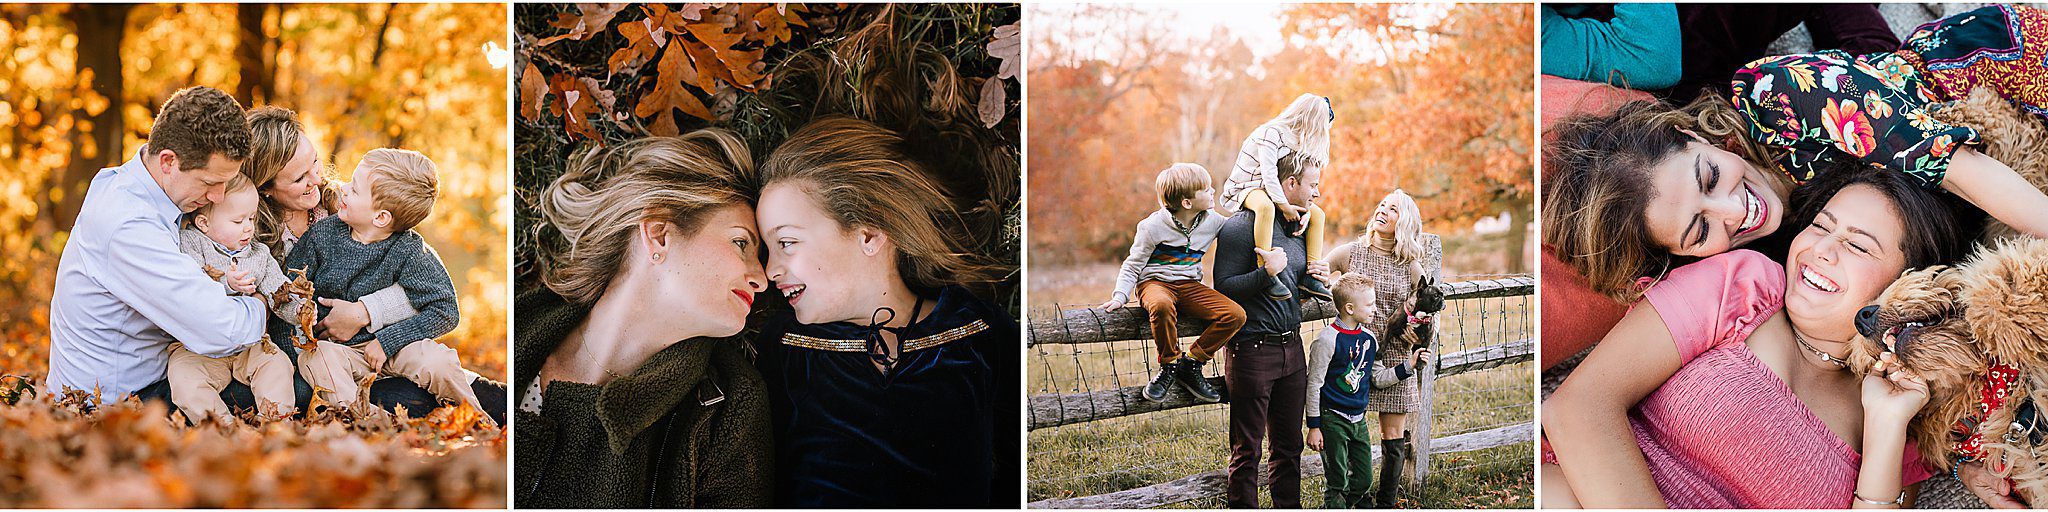 Fall Family Sessions 2020 by Helena Goessens Photography